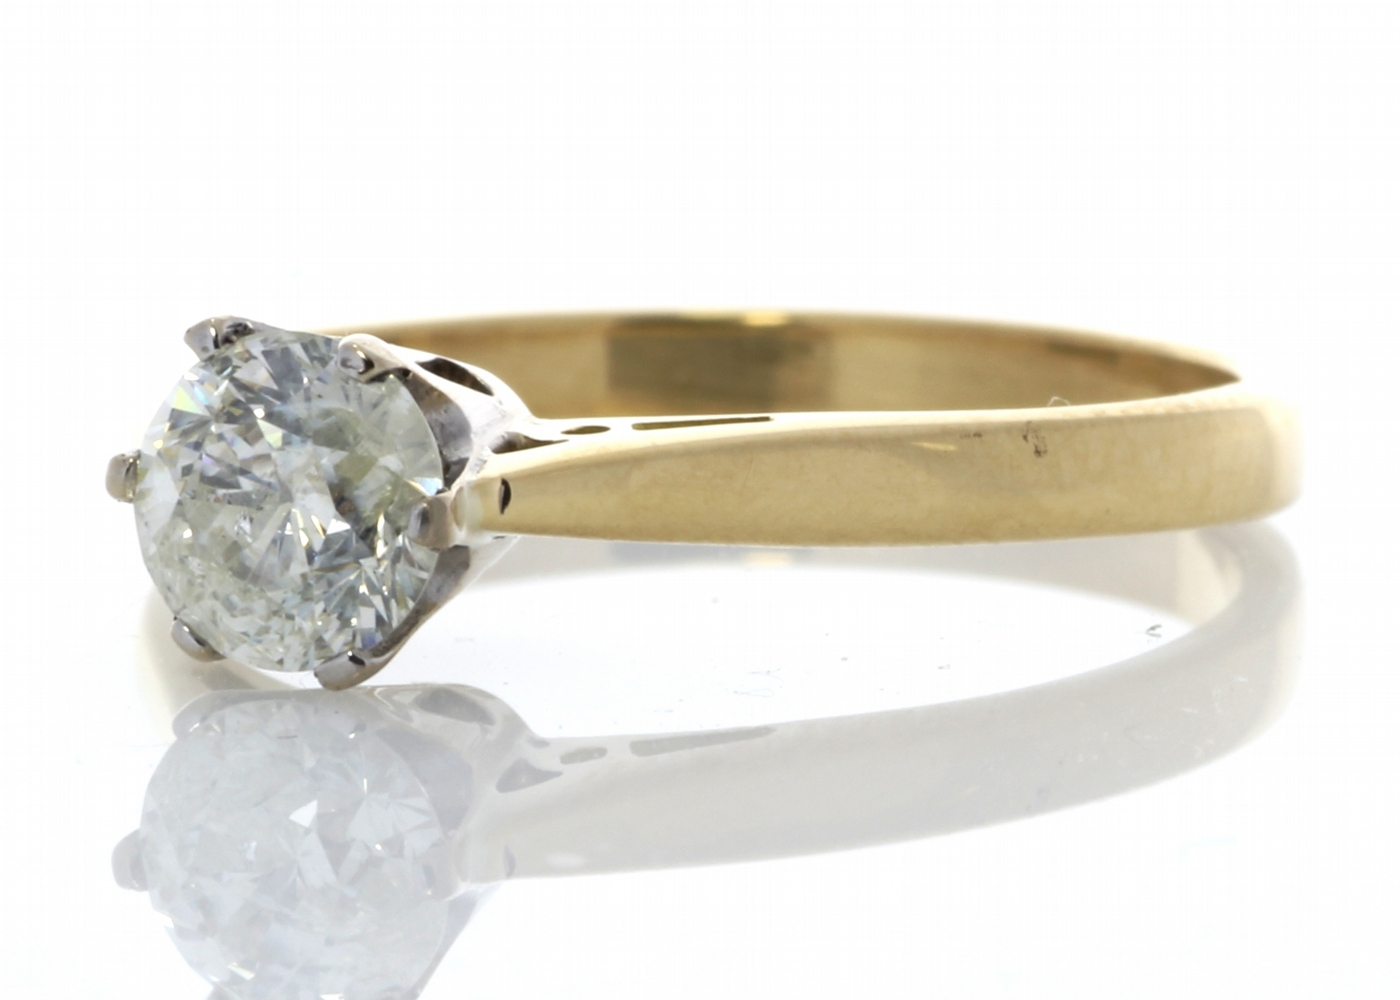 18ct Yellow Gold Diamond Engagement Ring 0.61 Carats - Valued By GIE £5,775.00 - This simple and - Image 2 of 6